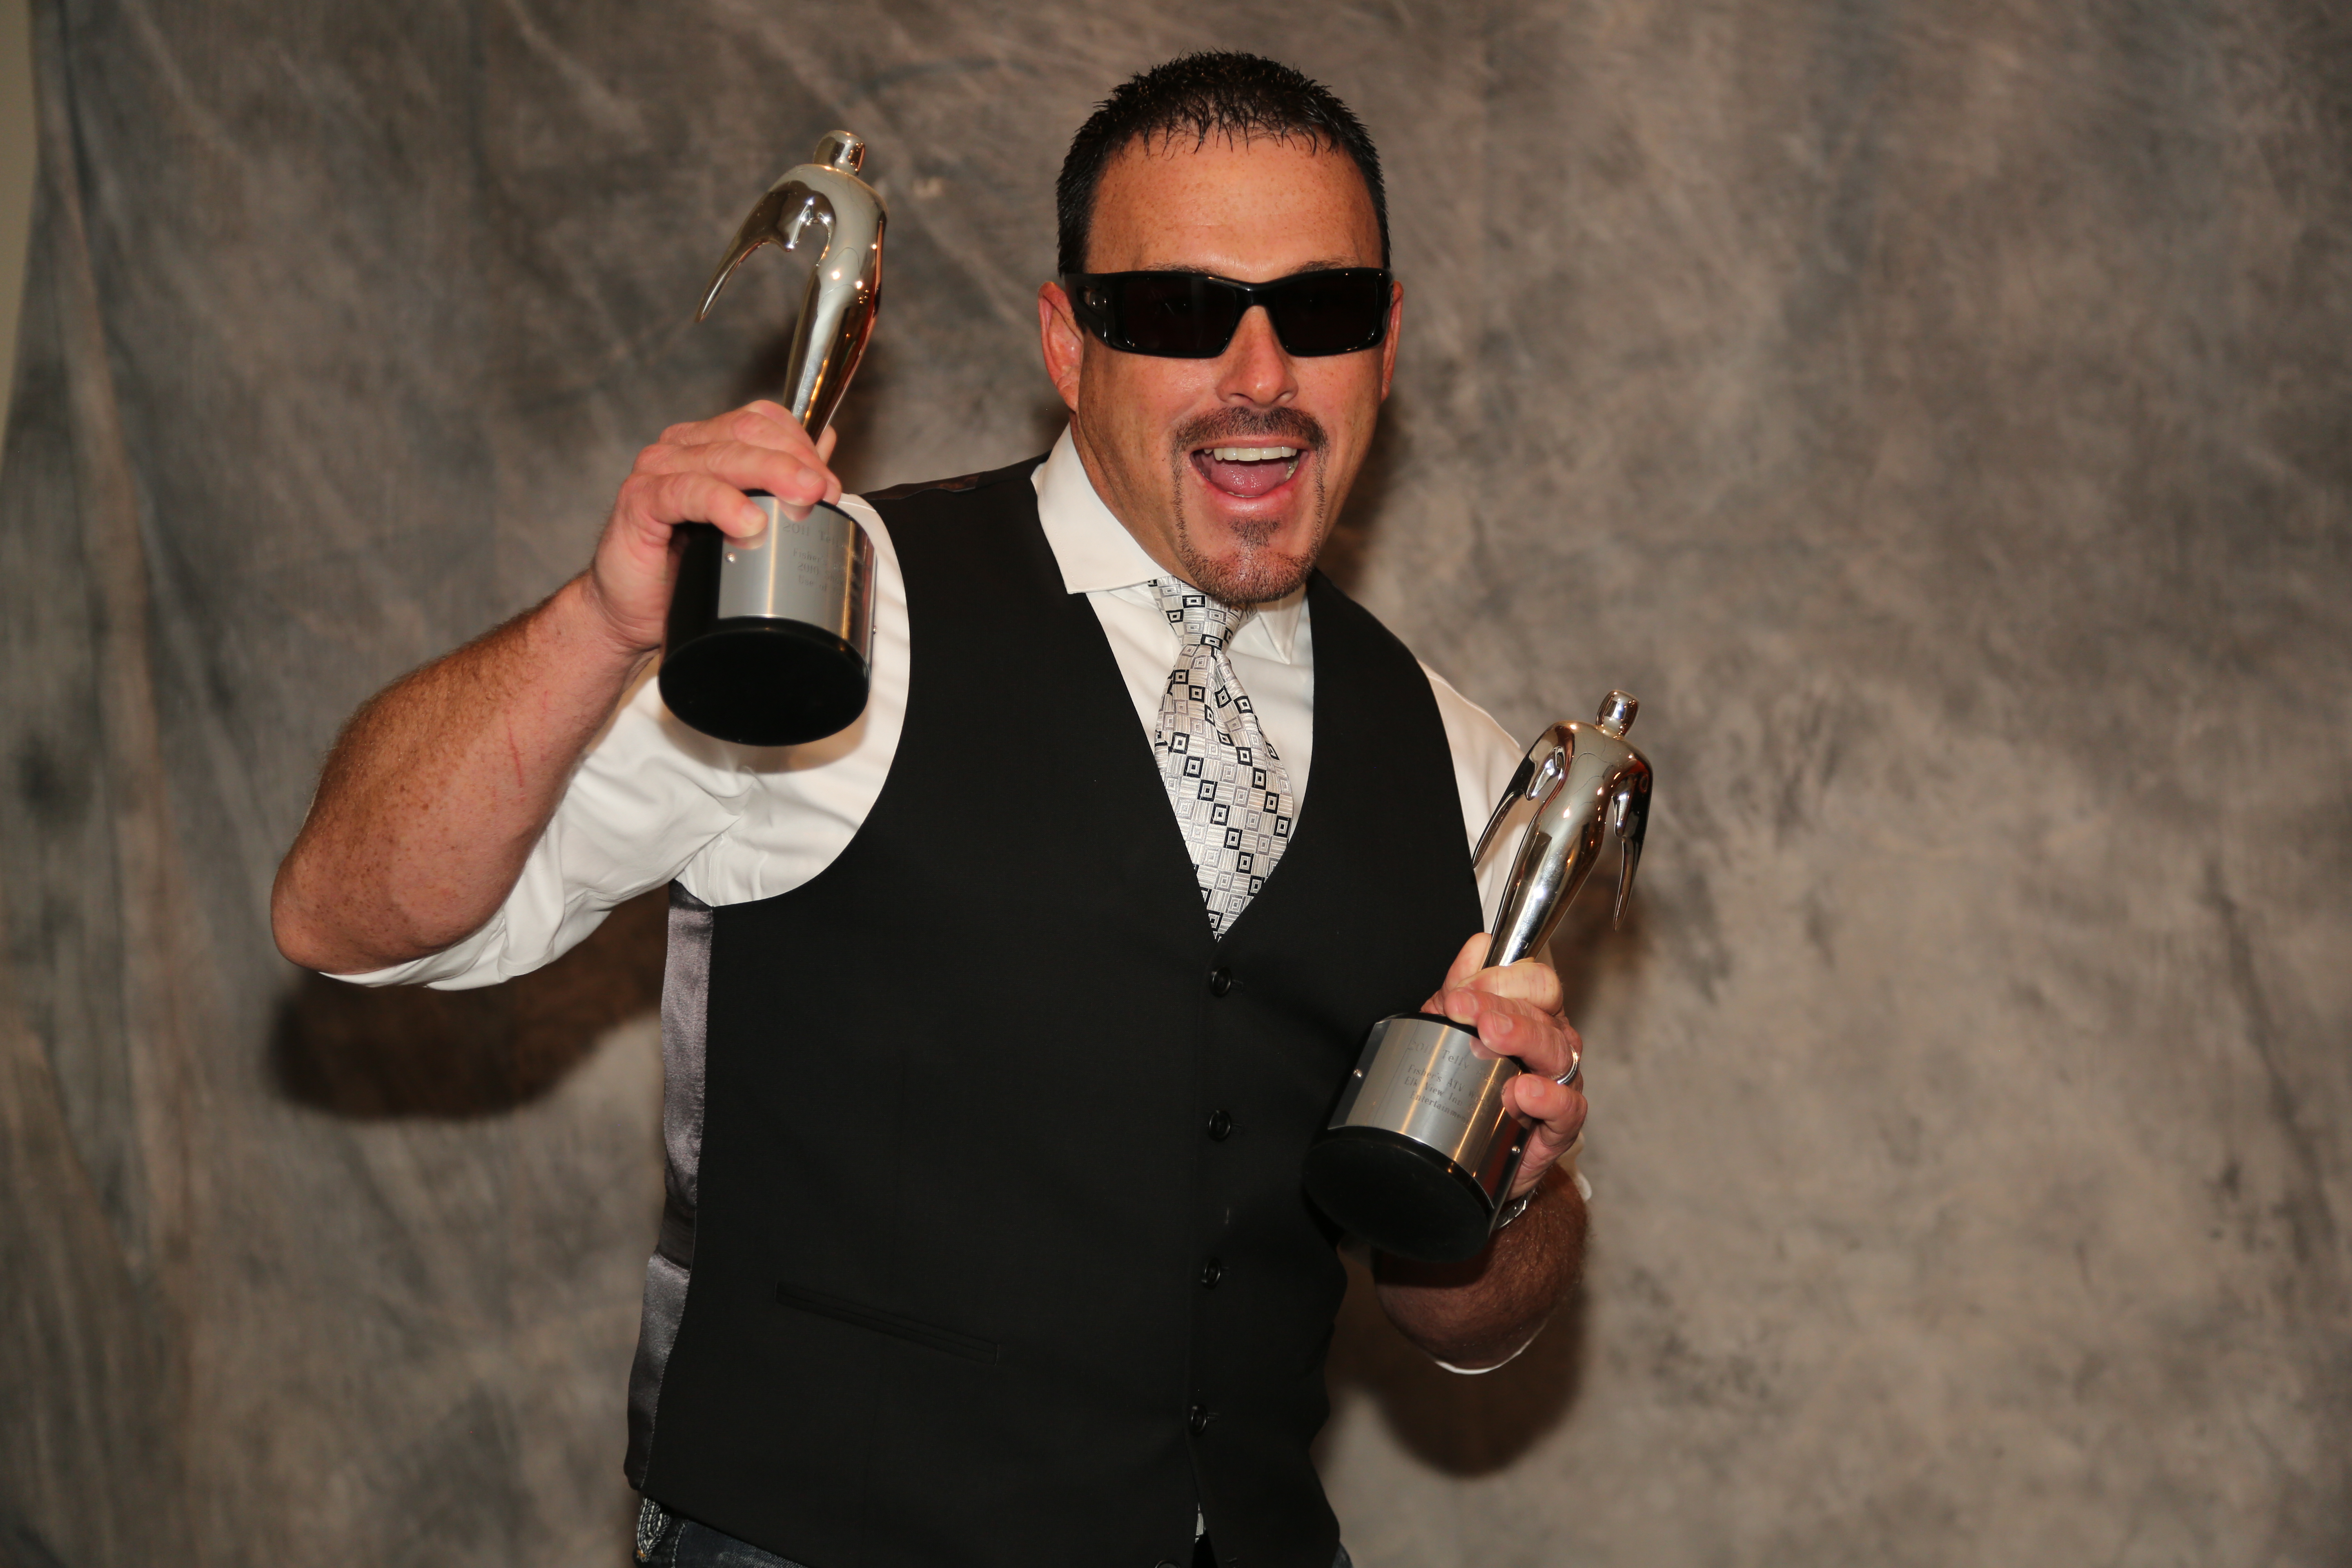 Brian won a few silver Telly Awards for Hosting the TV Show, Fisher's ATV World